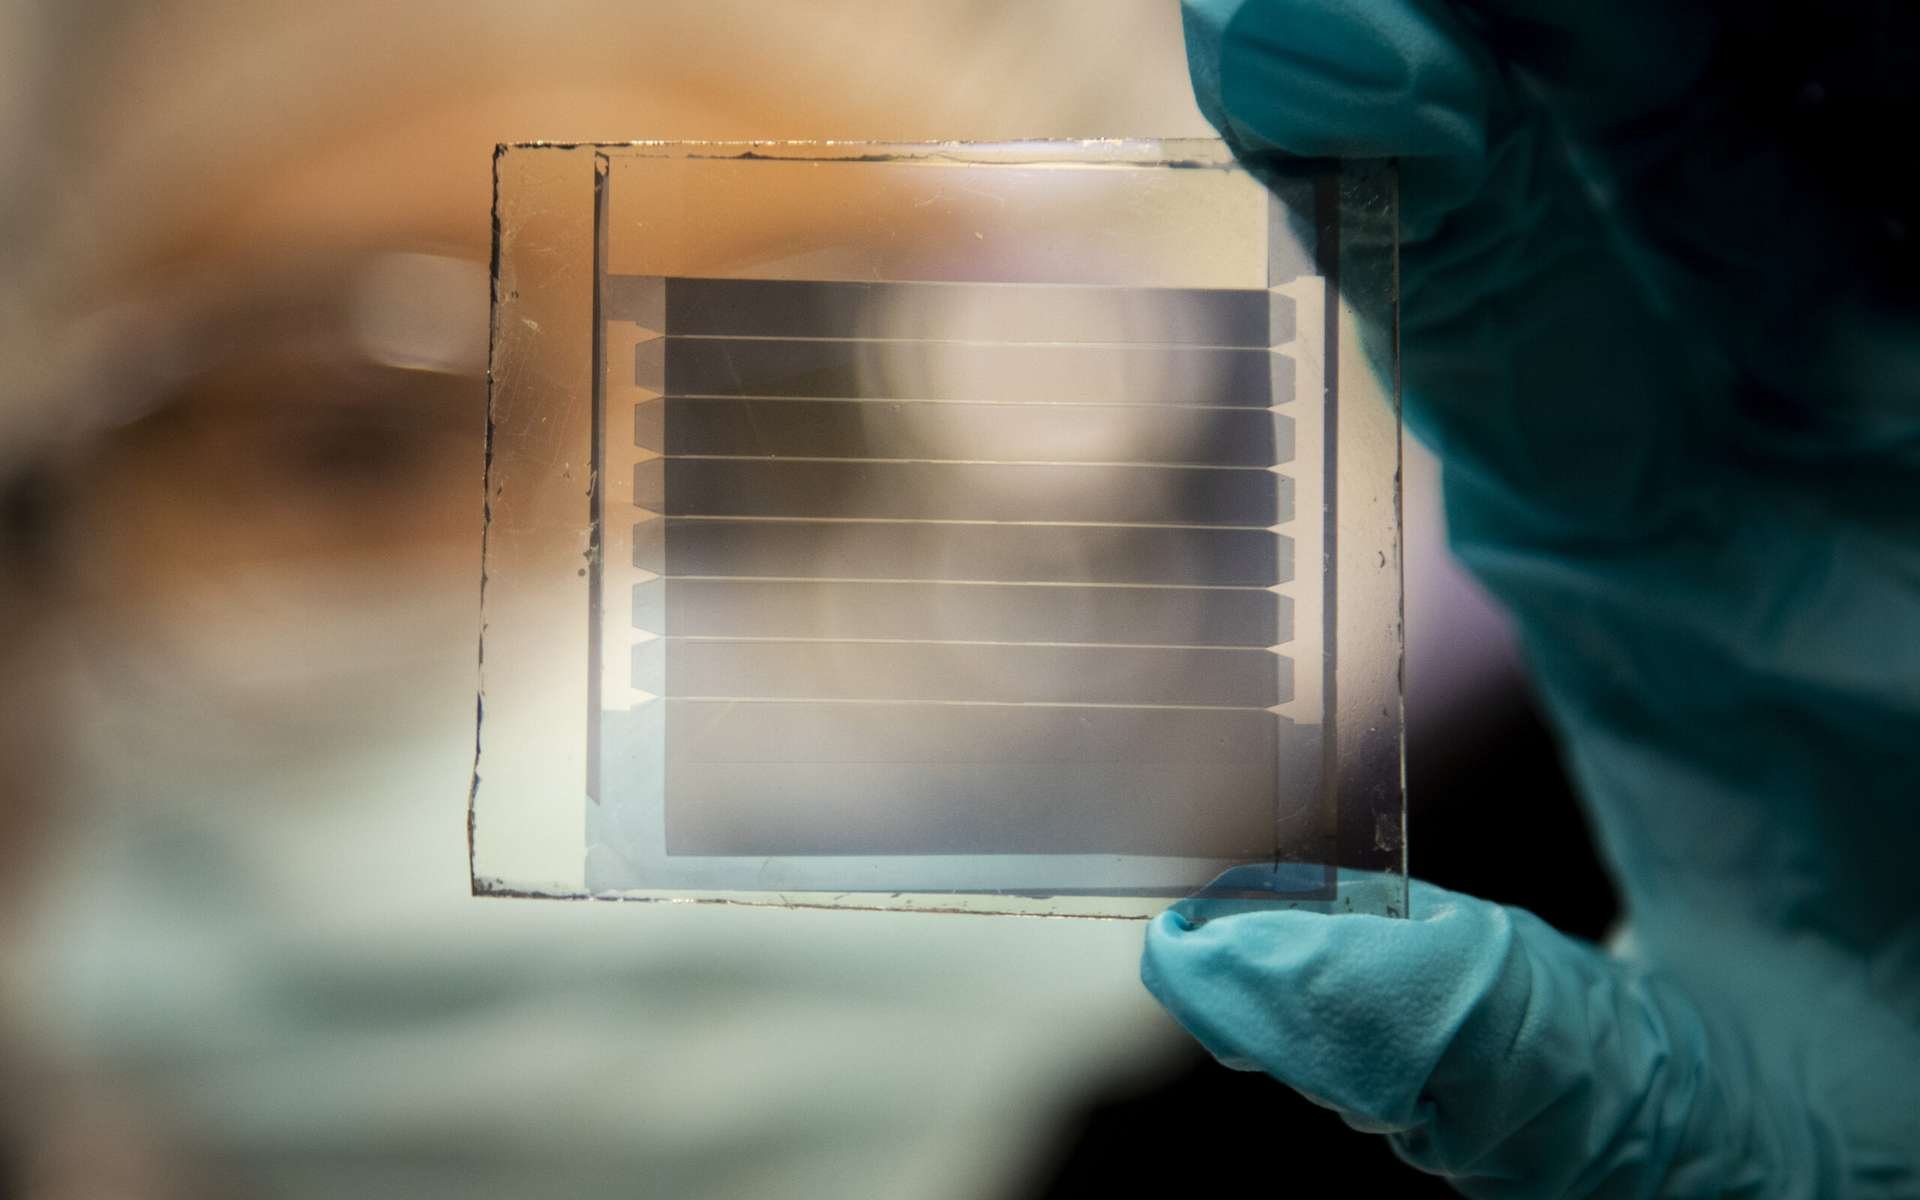 Engineers create transparent solar panels with a lifespan of 30 years